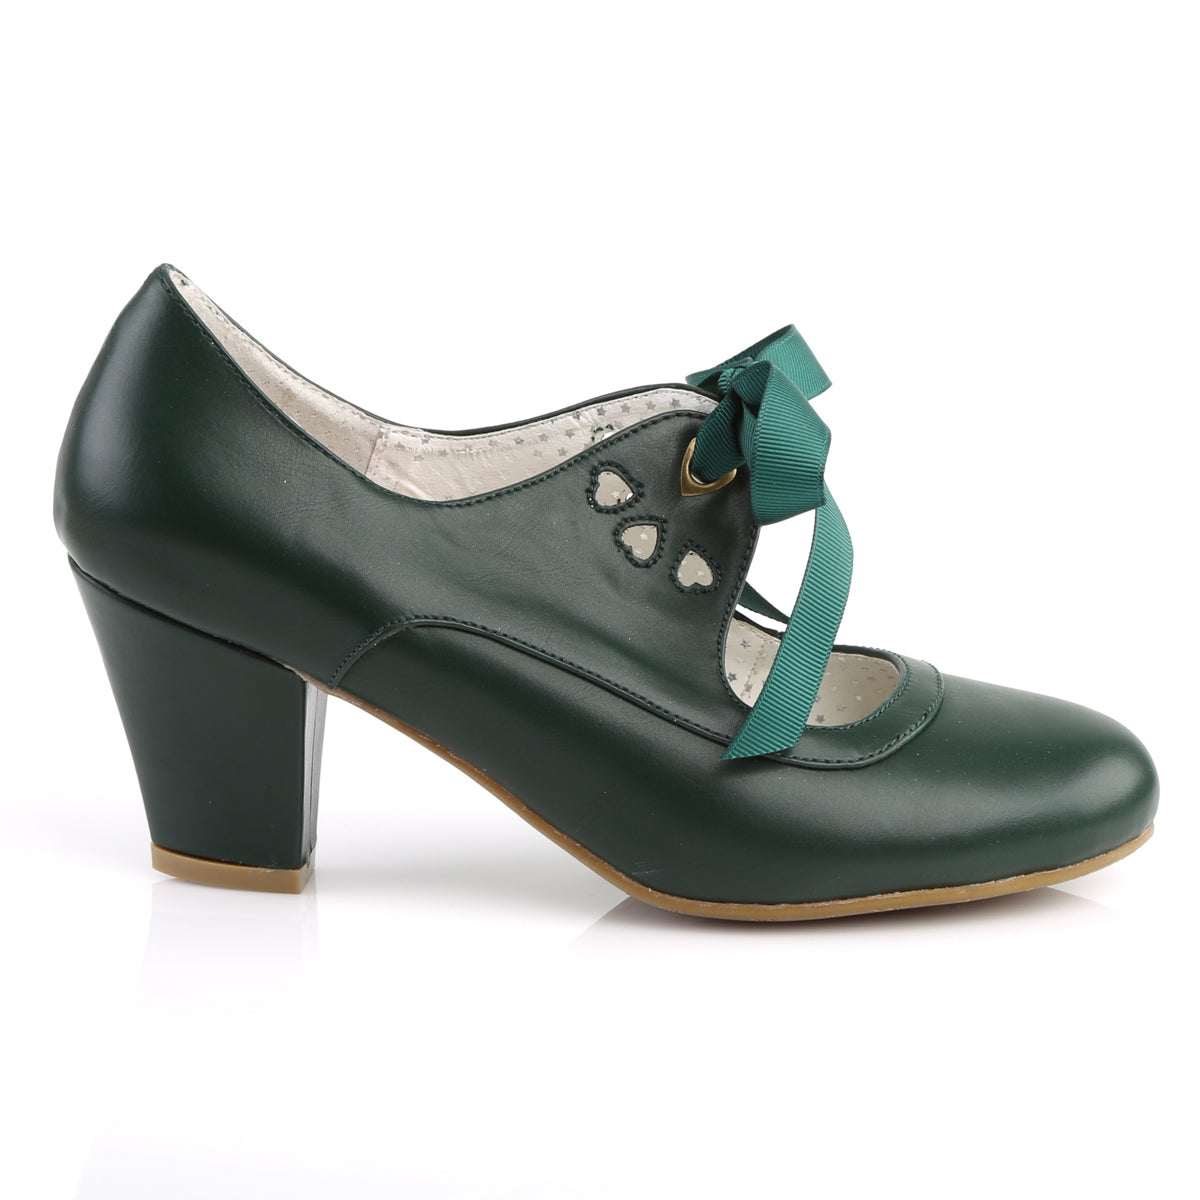 WIGGLE-32 Pin Up 2.5 Inch Heel Dark Green Fetish Footwear-Pin Up Couture- Sexy Shoes Fetish Heels